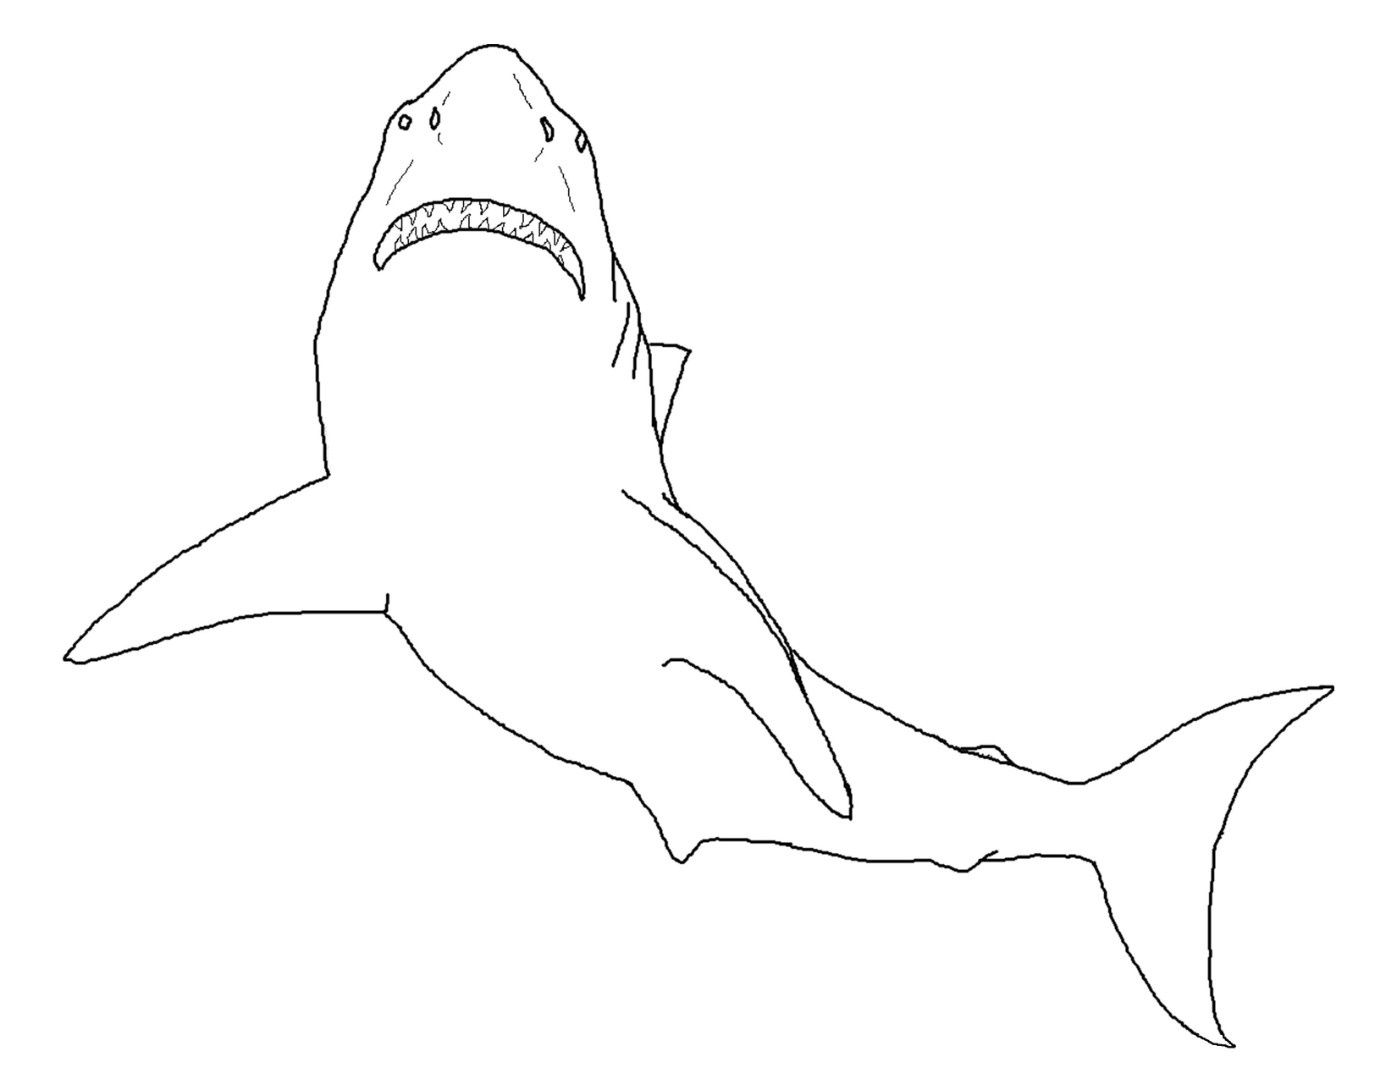 Great white shark coloring pages to download and print for free